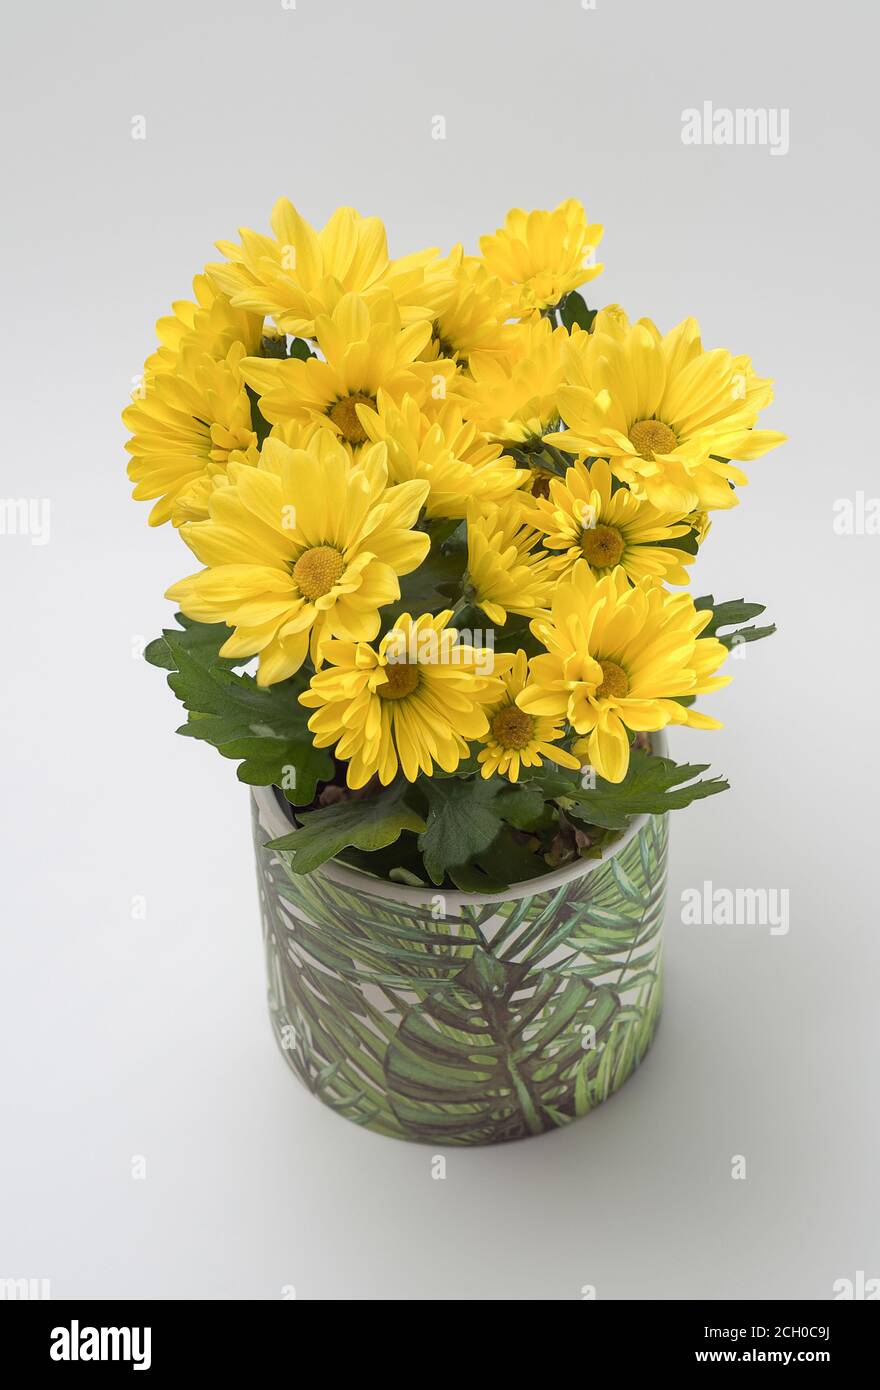 Chrysanthemum indicum - a bouquet of tiny yellow flowers that bloom nicely, on a light background in a decorative pot Stock Photo